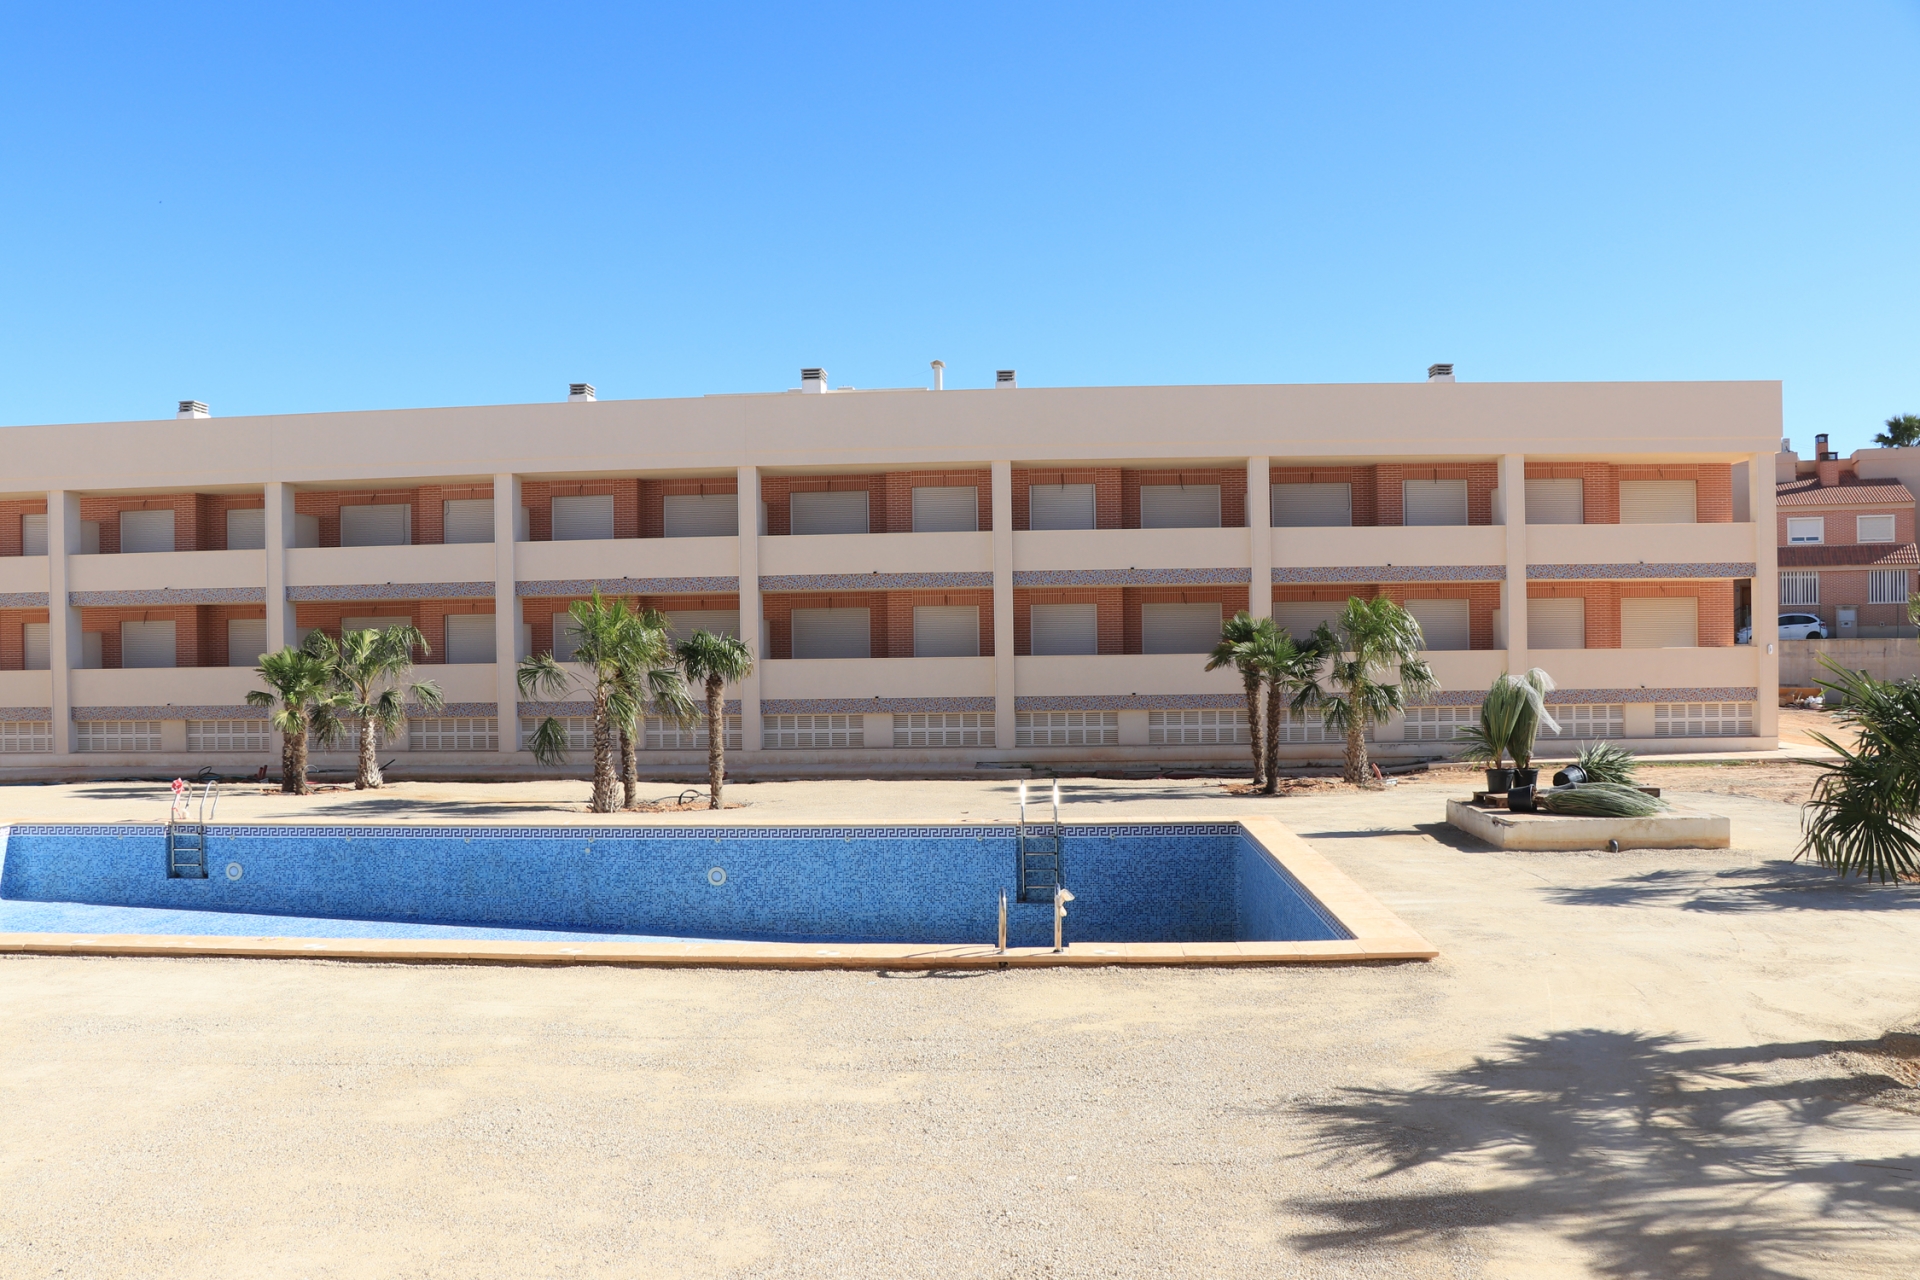 Property Sold - Apartment for sale - Gran Alacant - Gran Alacant central